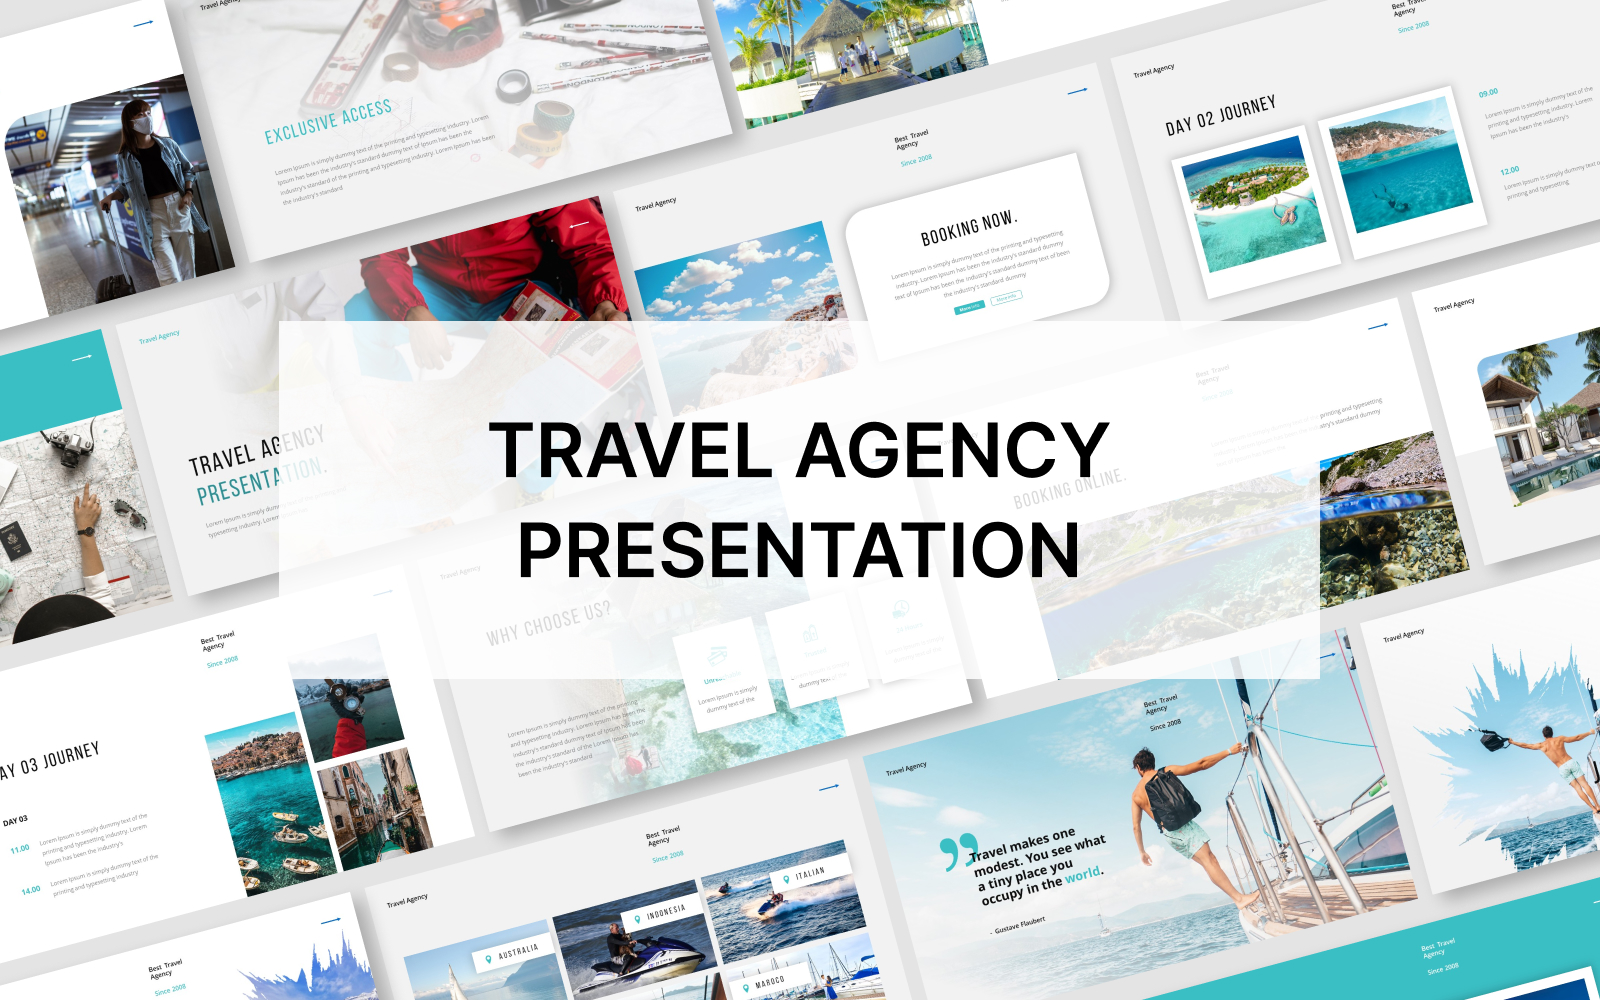 Travel Agency Powerpoint Presentation Template